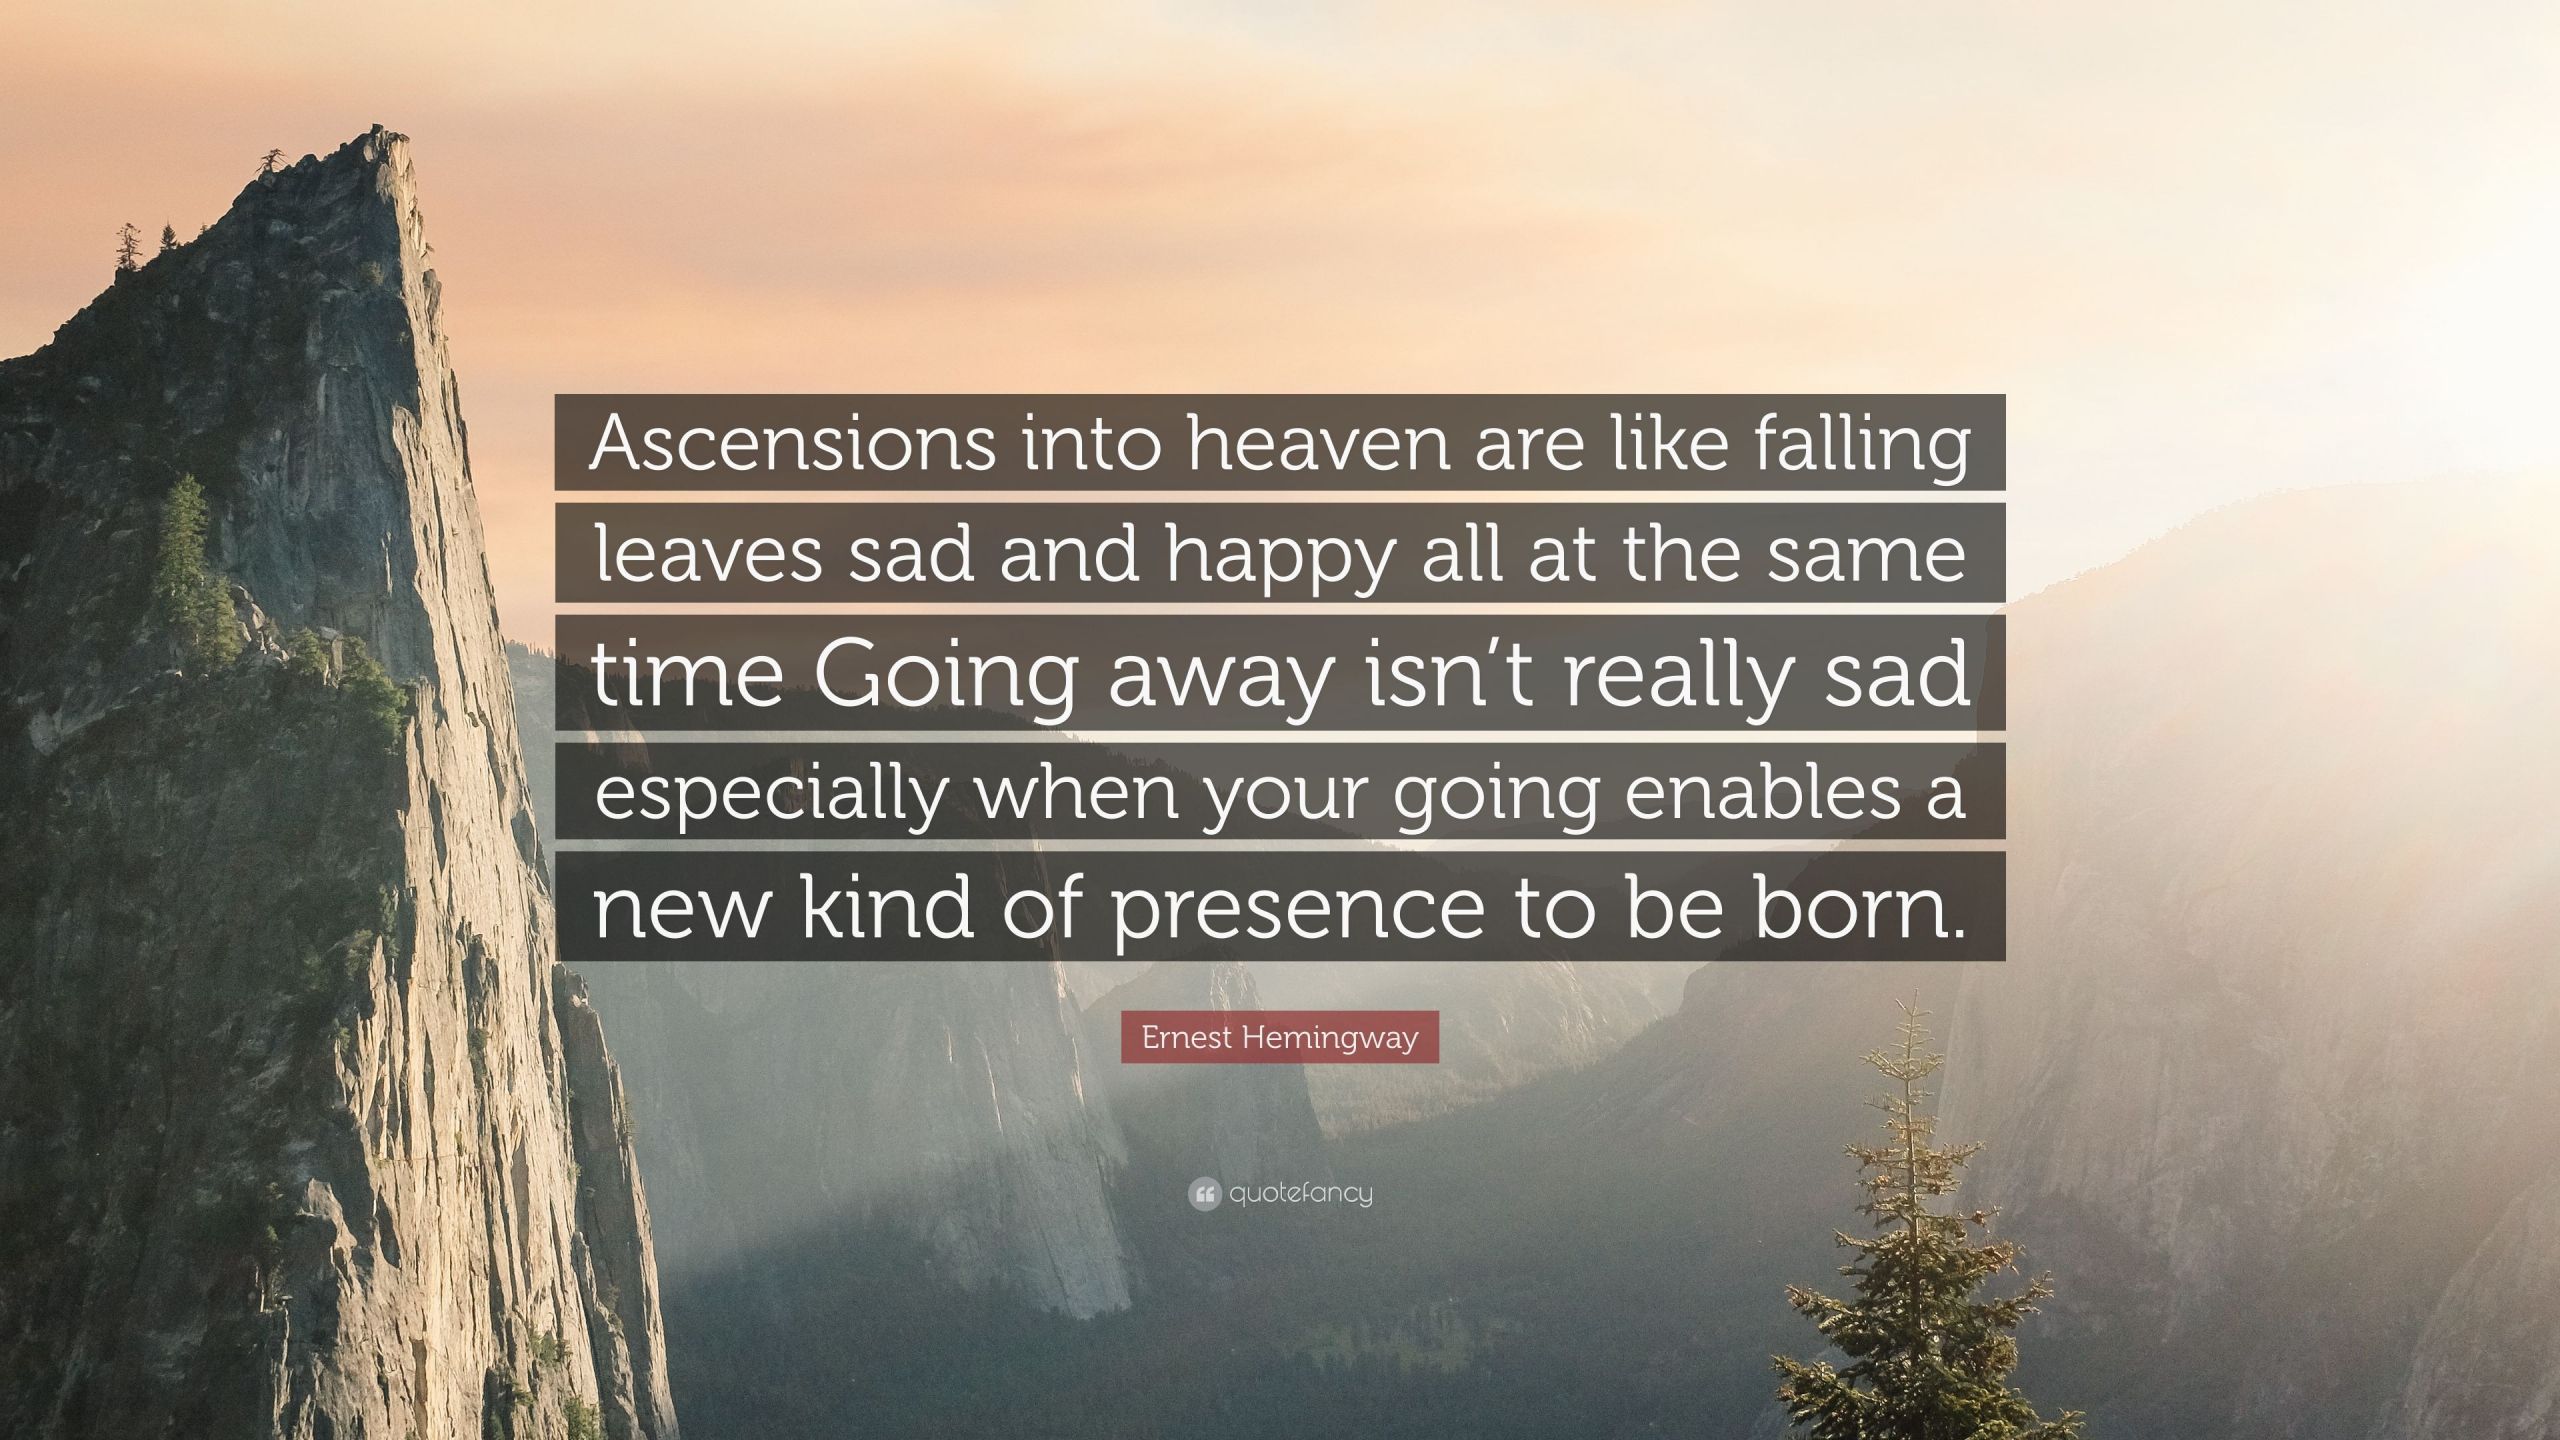 Happy And Sad At The Same Time Quotes
 Ernest Hemingway Quote “Ascensions into heaven are like